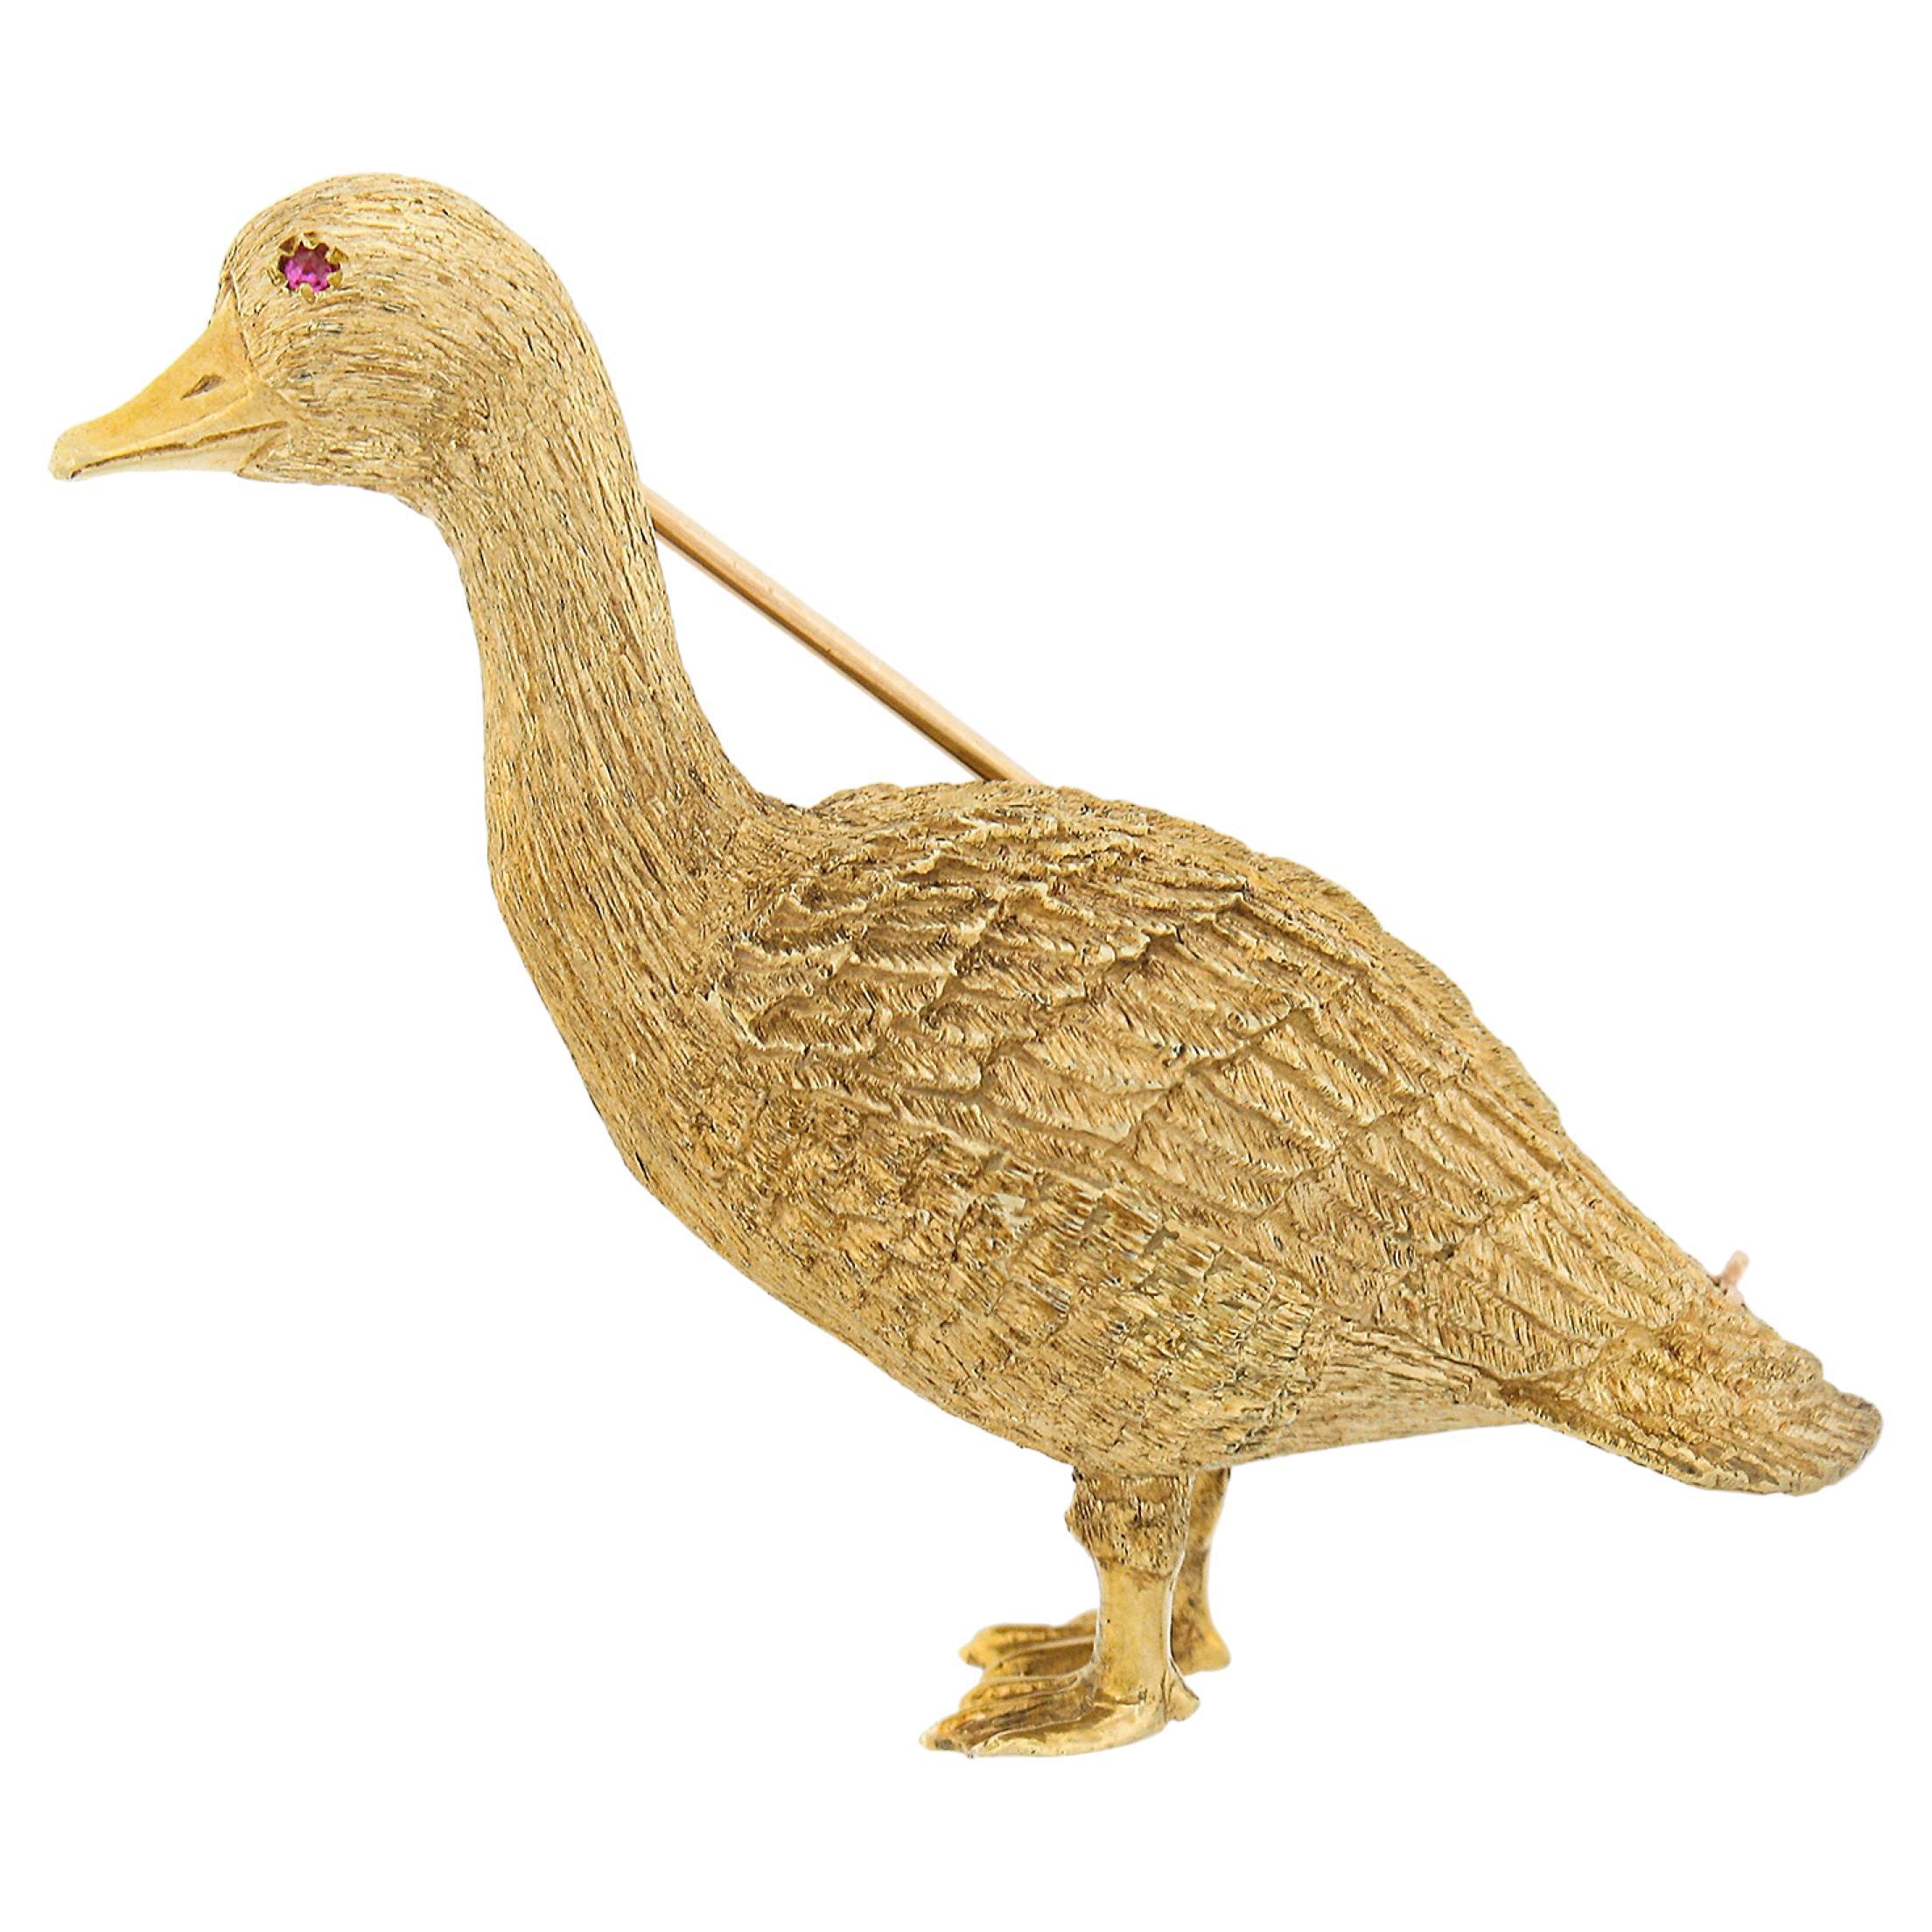 Handmade 18K Yellow Gold Hand Carved & Textured Goose Pin Brooch w/ Ruby Eye For Sale